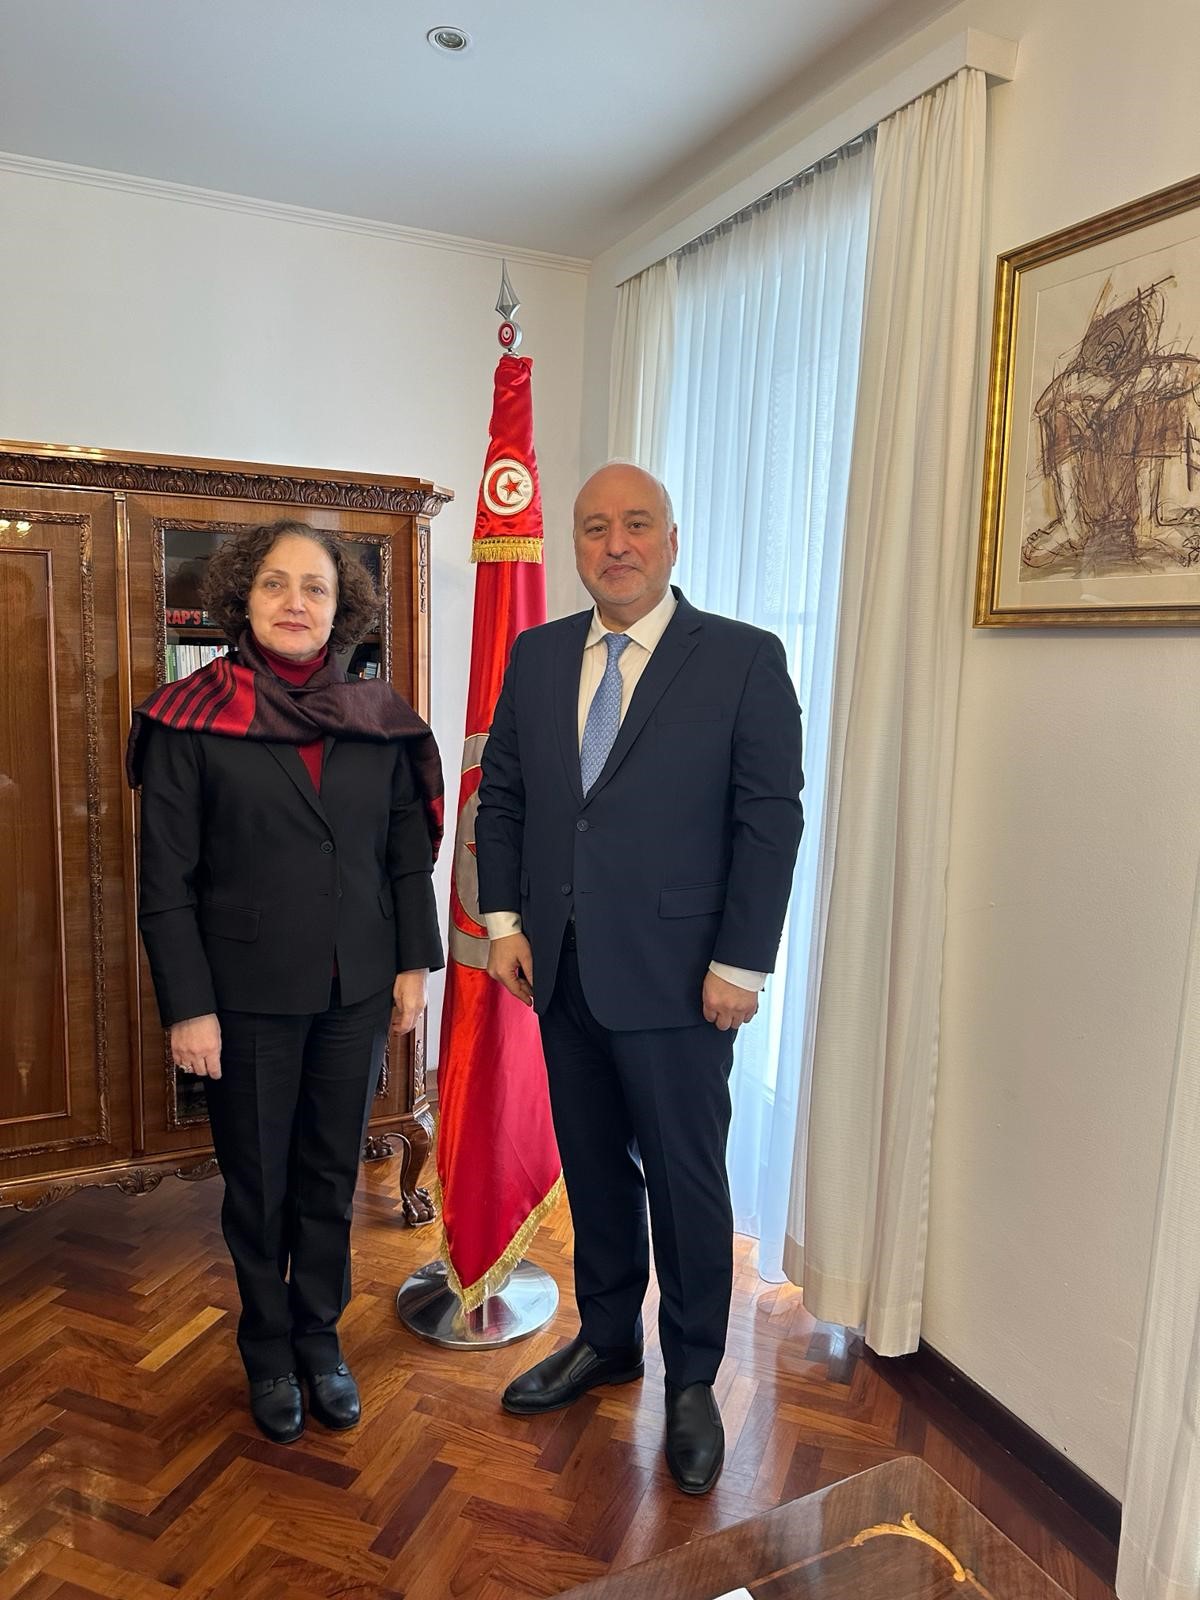 Courtesy Visit to the Newly-appointed Ambassador of the Republic of Tunisia to Austria